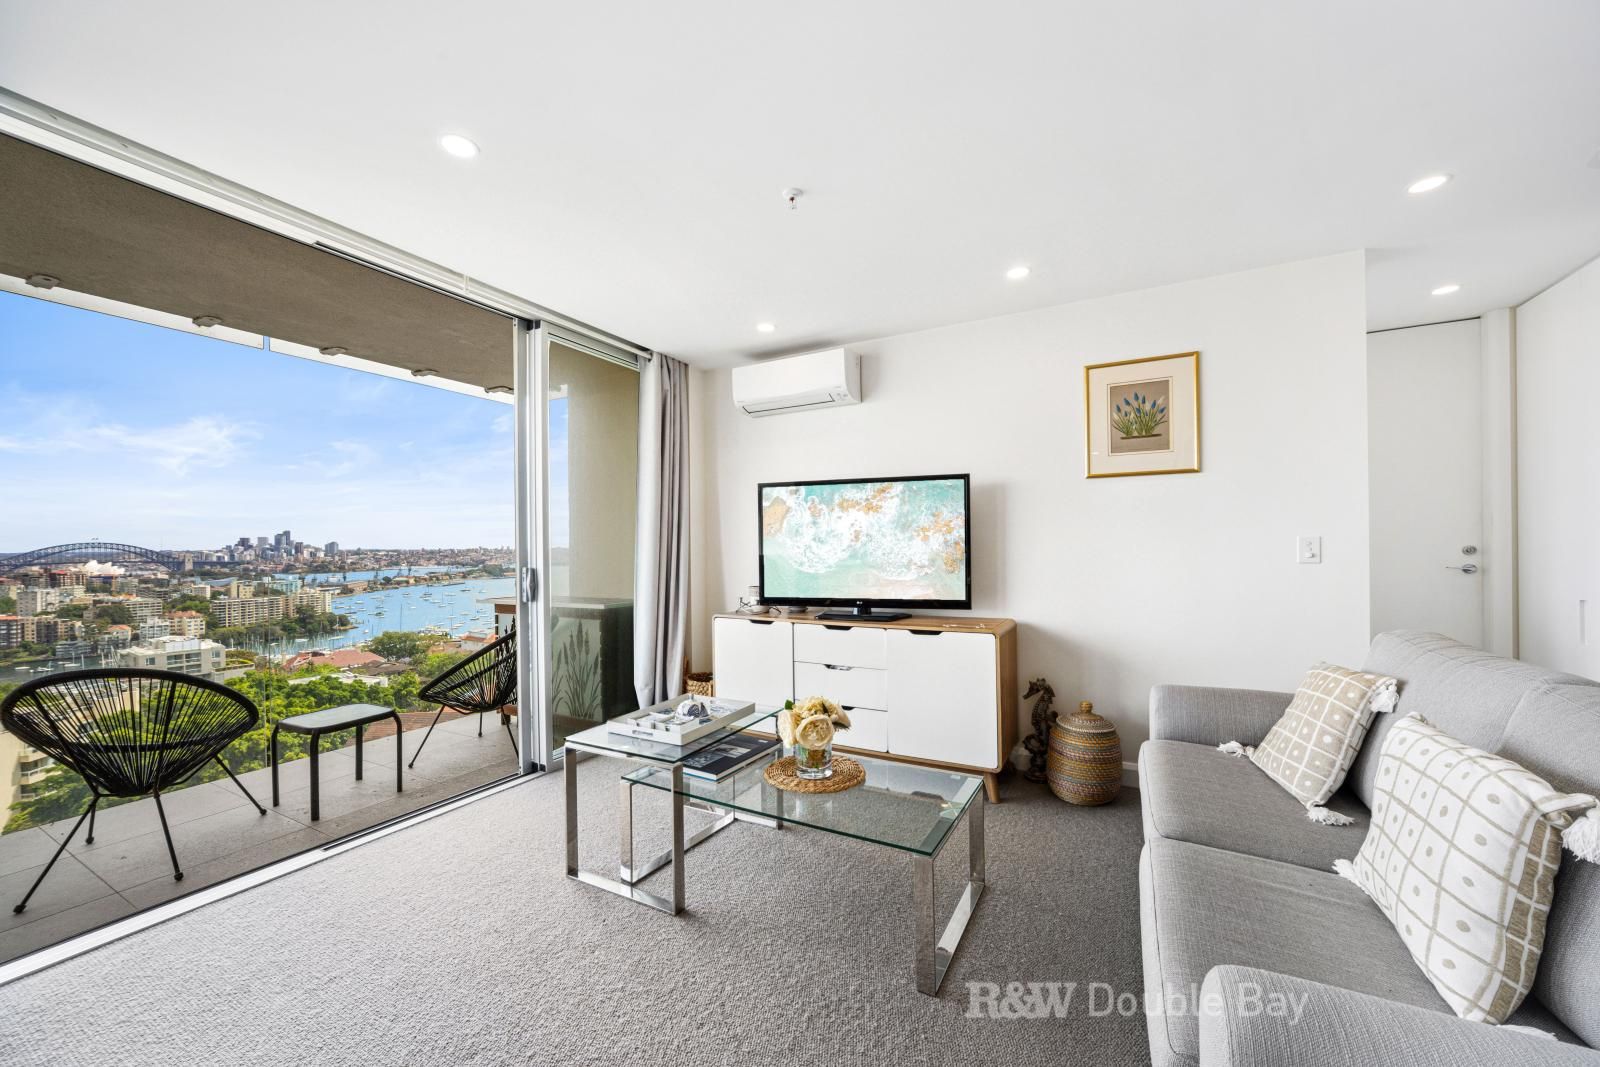 14B/3-17 Darling Point Road, Darling Point NSW 2027